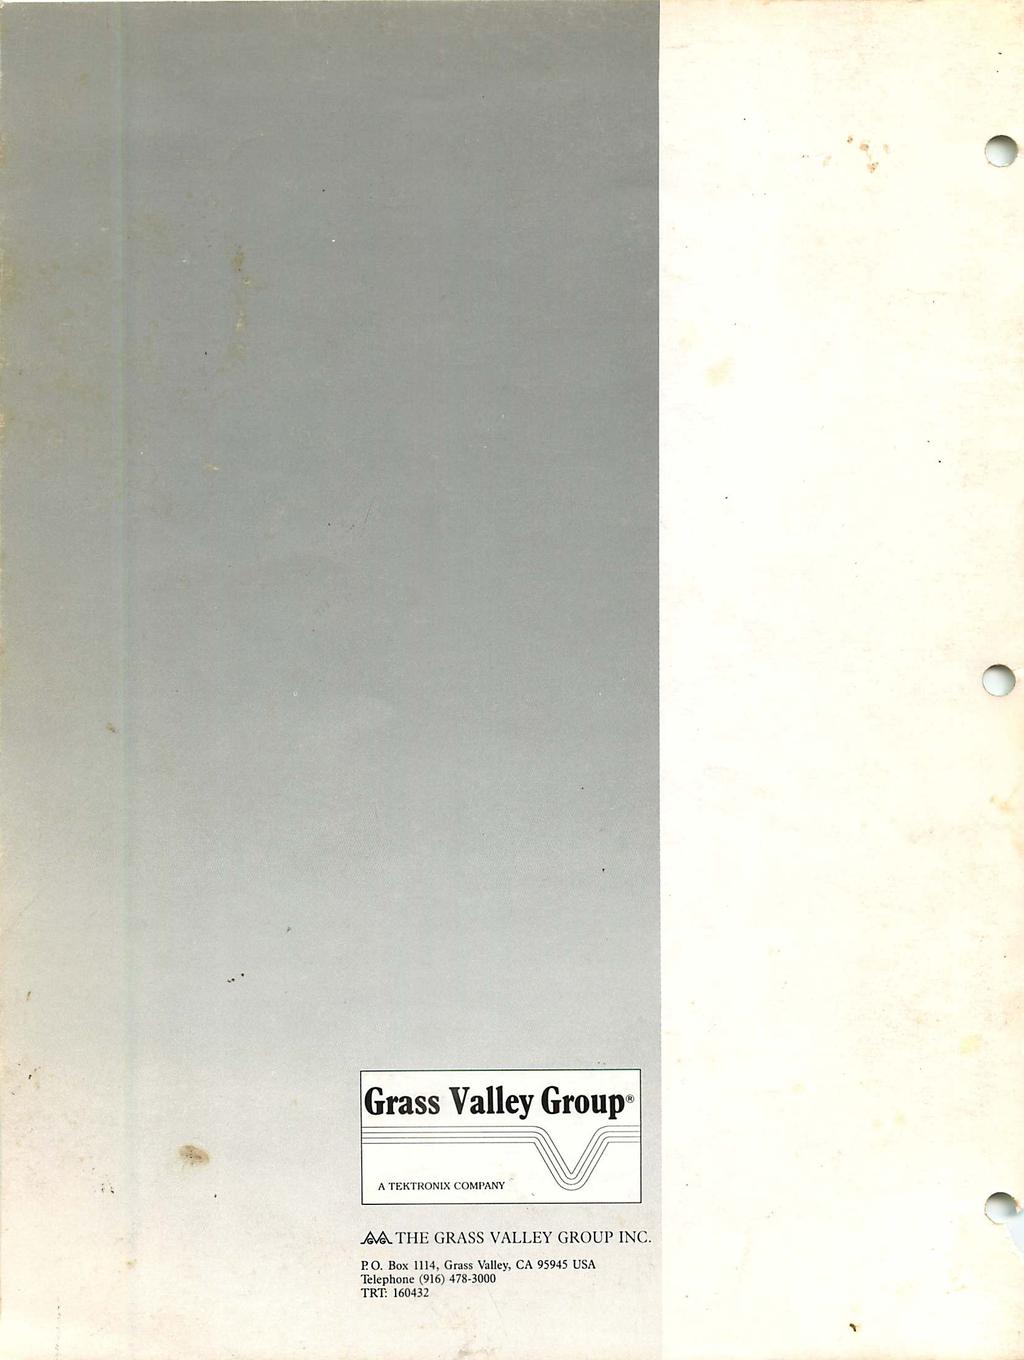 3 Grass Valley Group A TEKTRONIX COMPANY J&&.THE GRASS VALLEY GROUP INC.